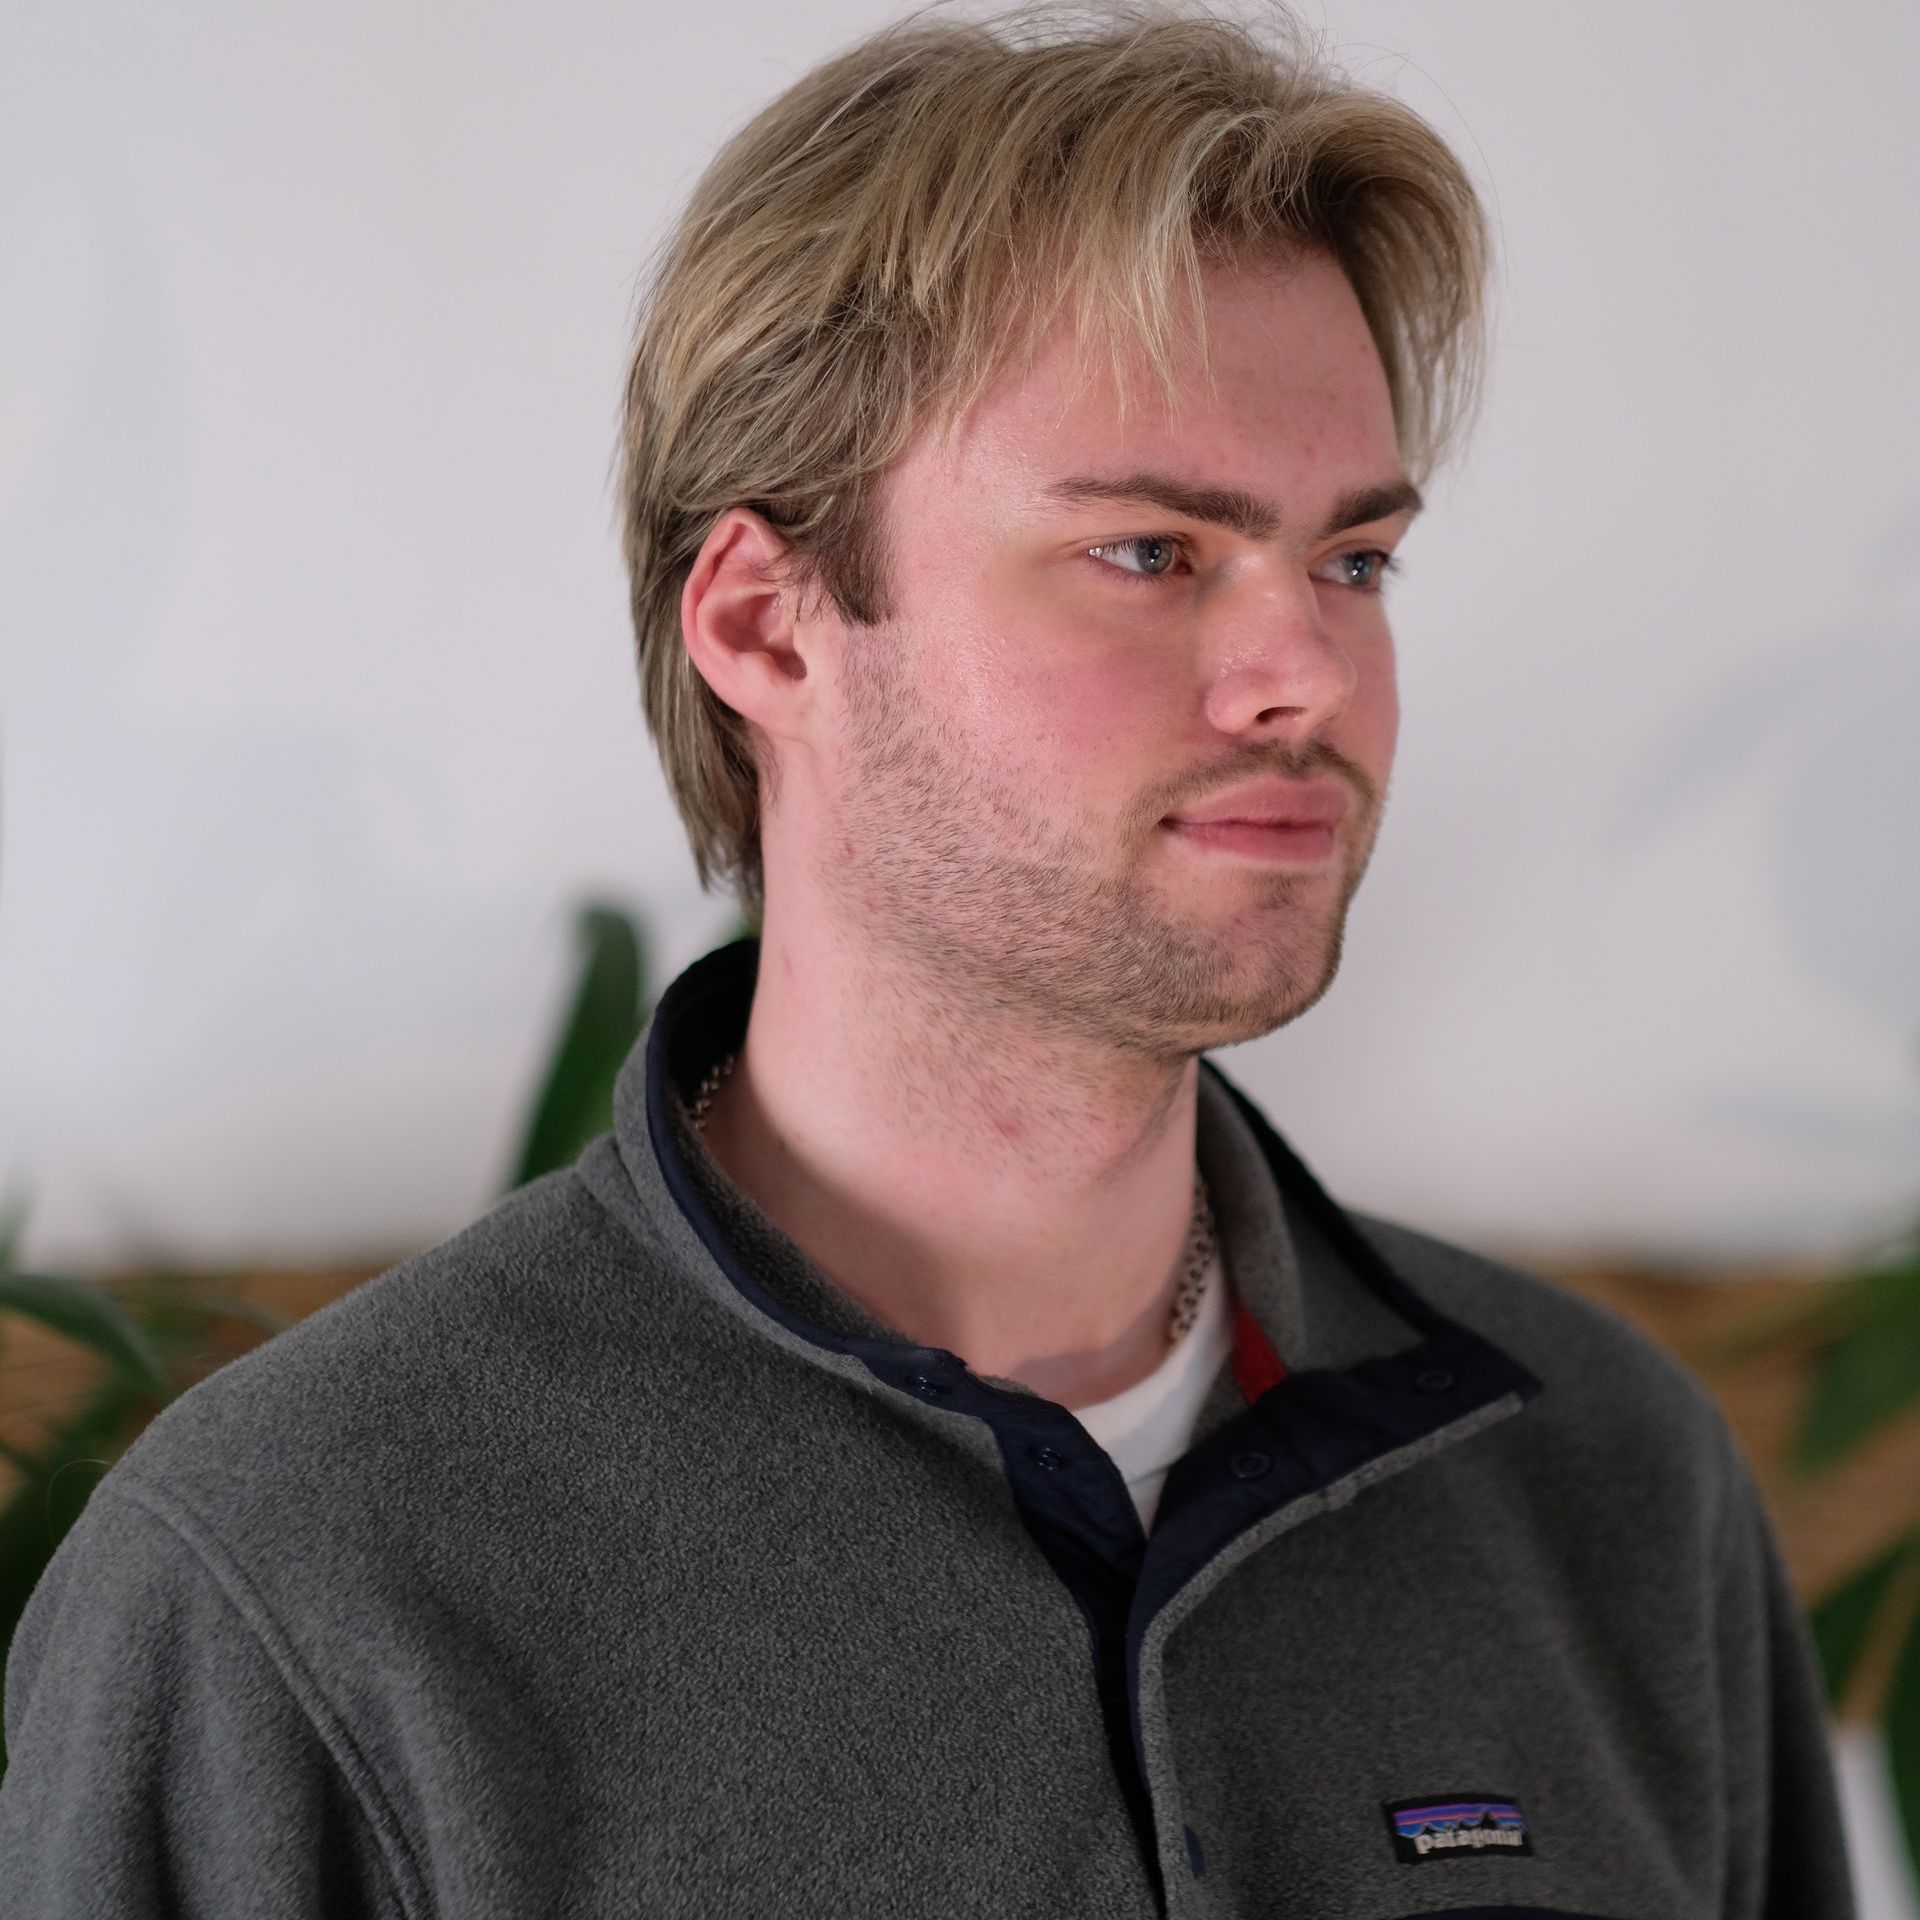 Headshot: a white man with blond hair and stubble looks to the side of the camera wearing a fleece with a zip